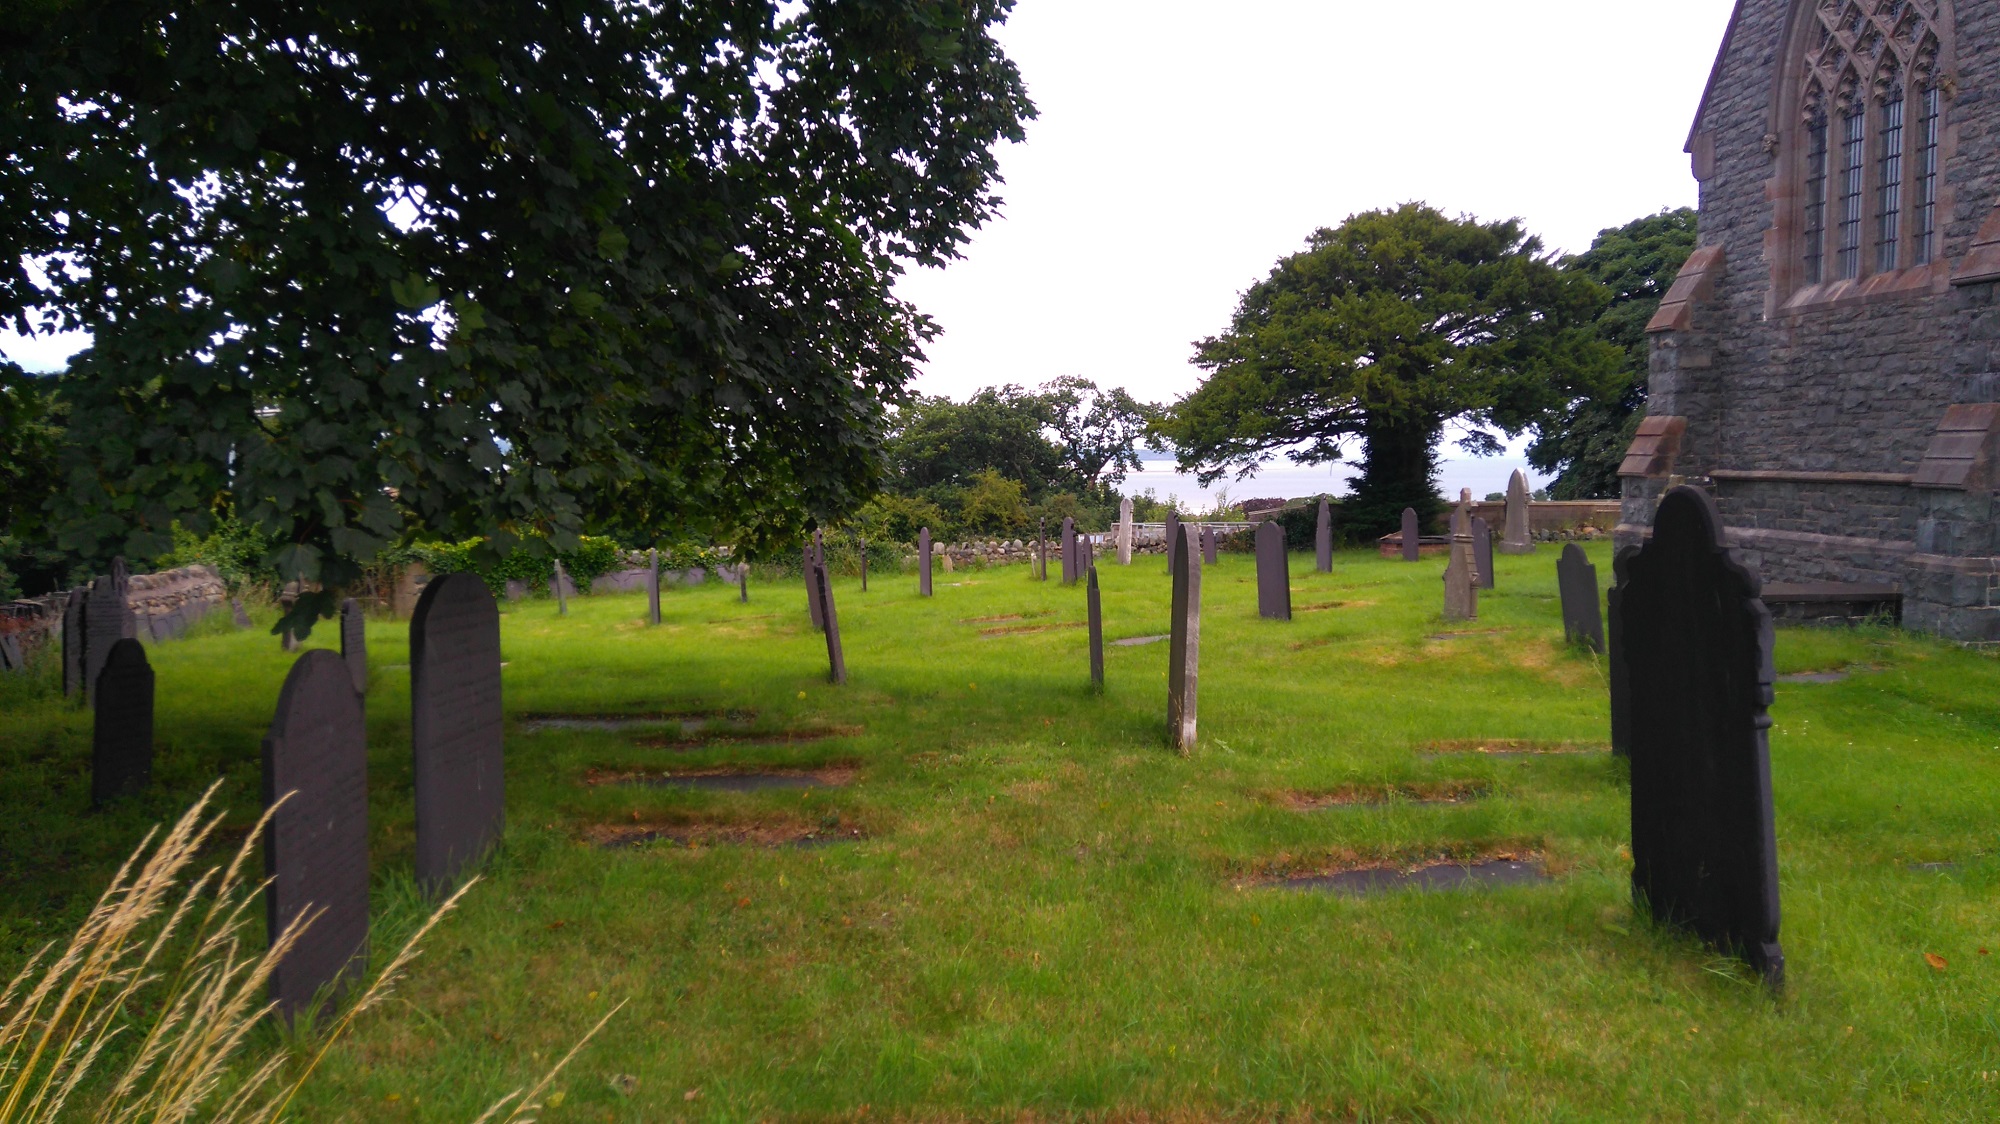 A grassy rural graveyard with dark headstones on a dull summer day. The end of the church is visible to the right.